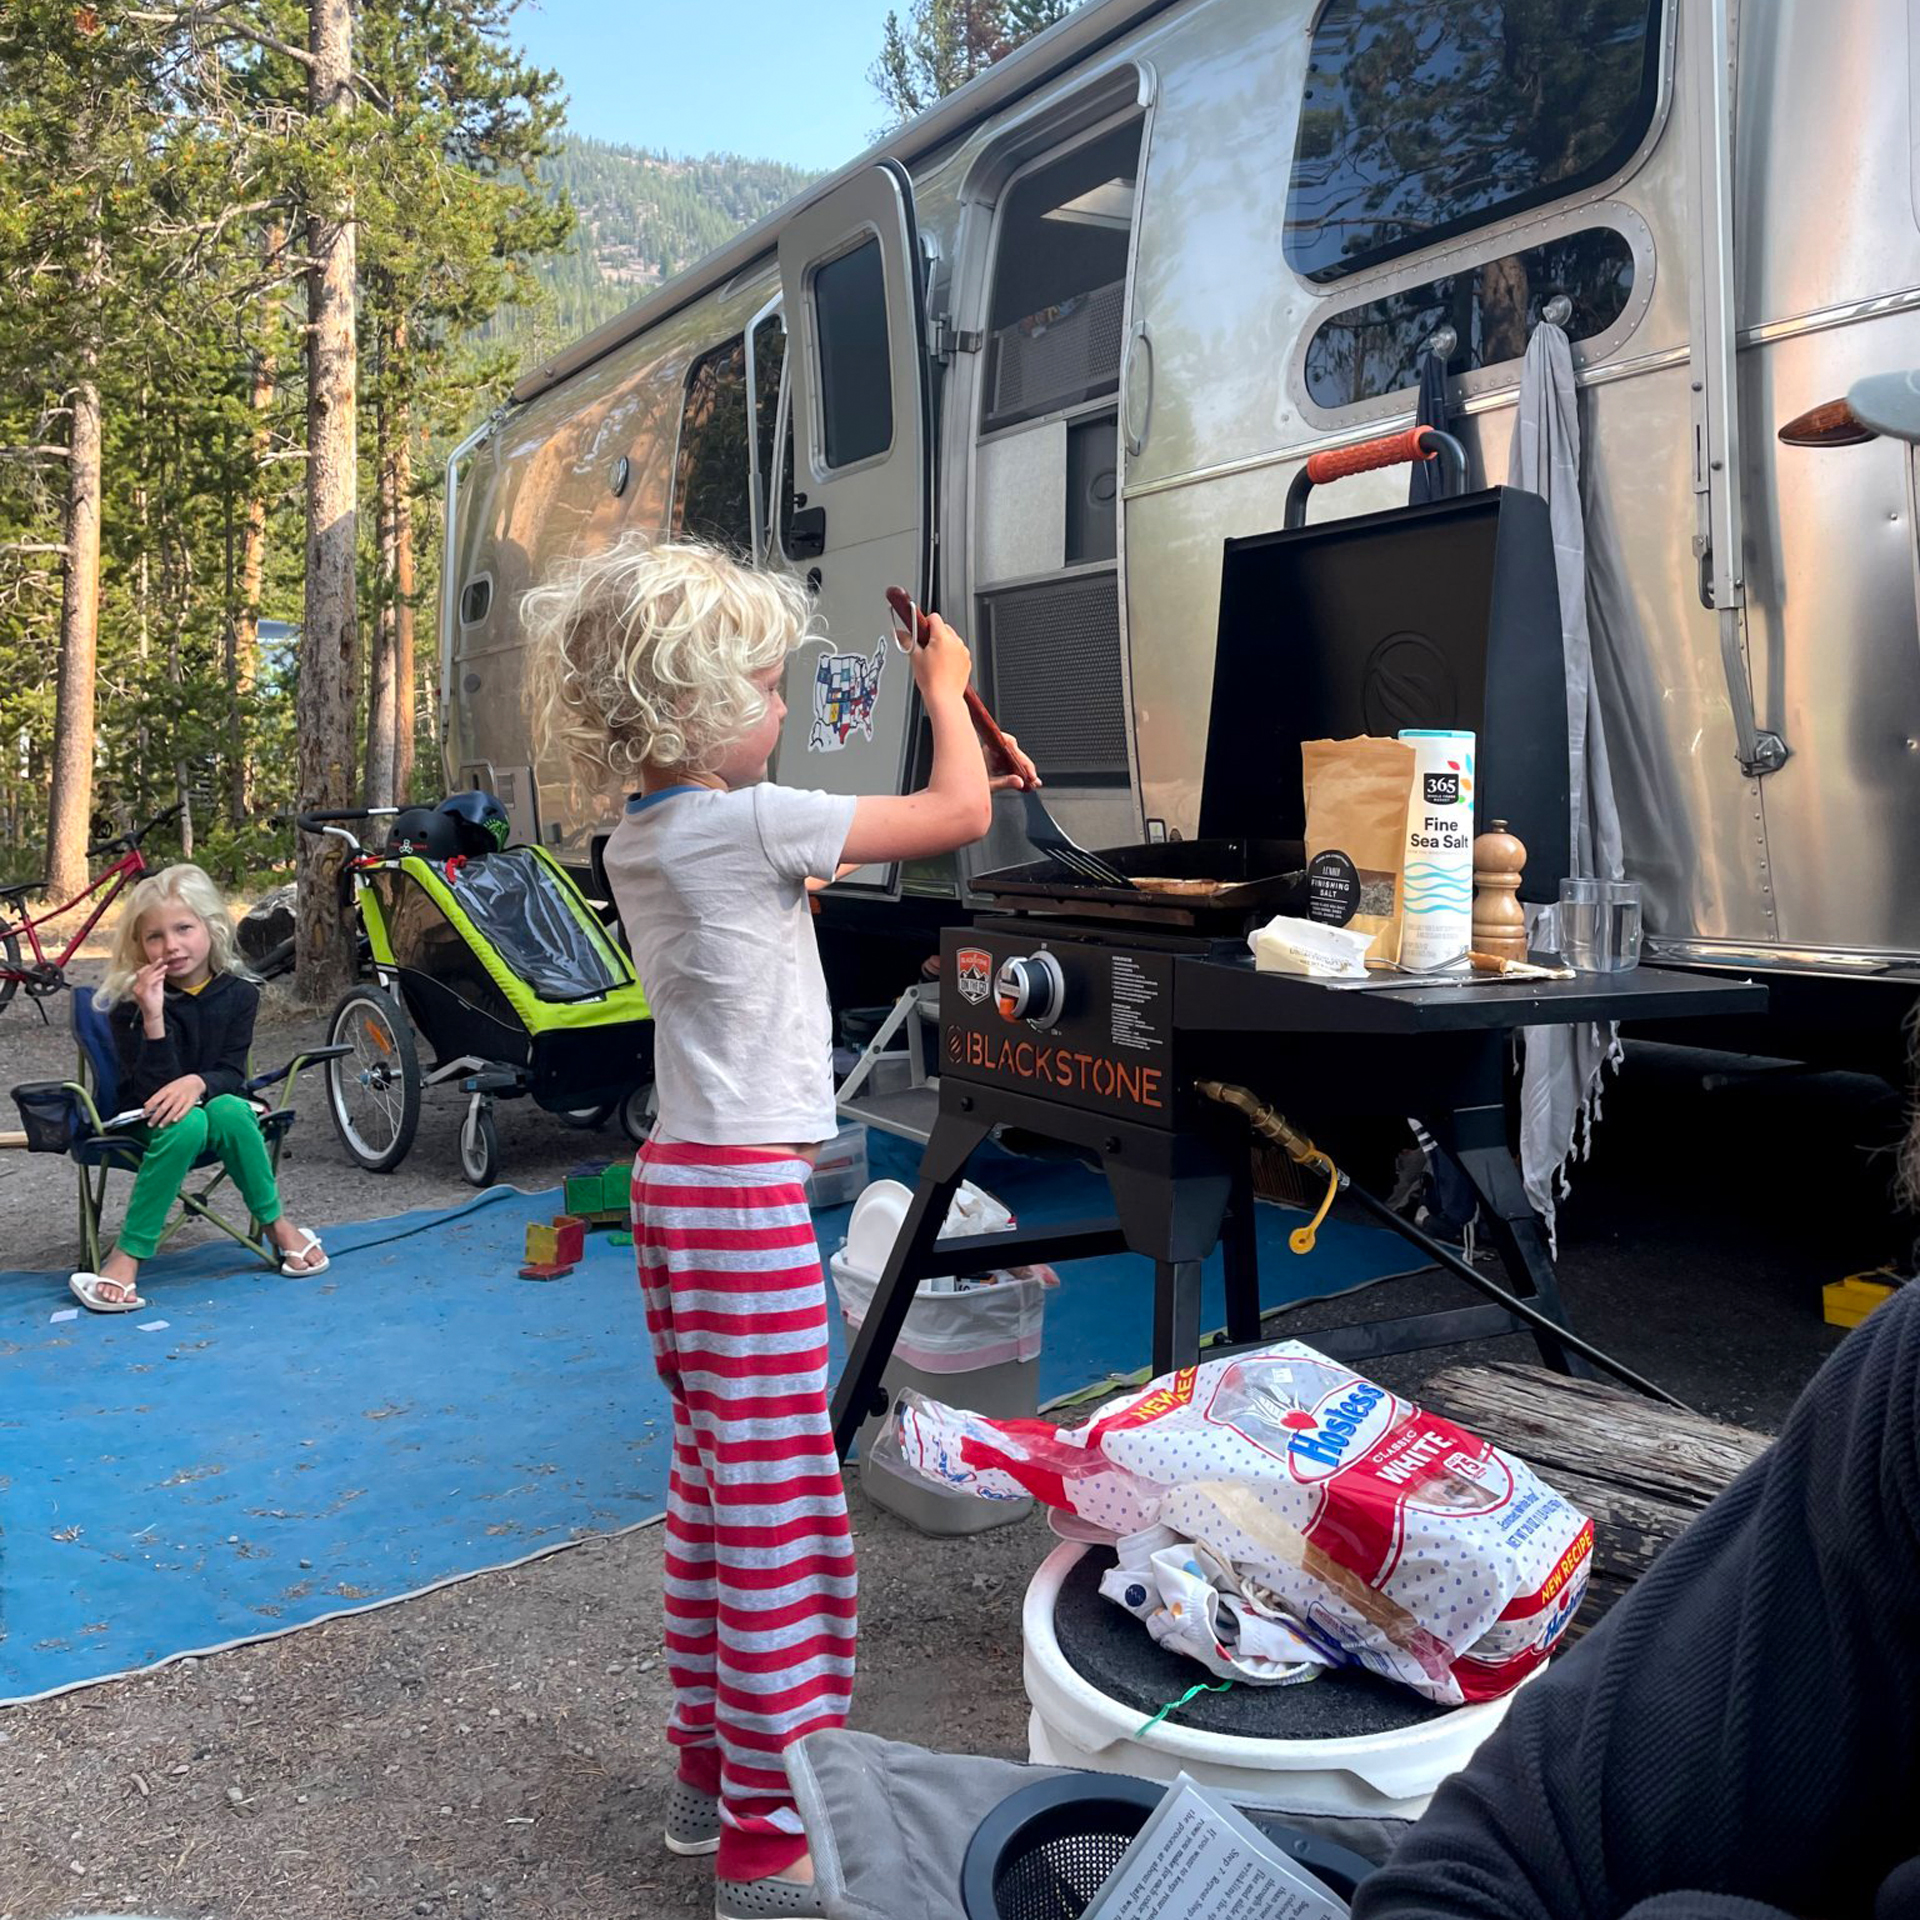 A little kid cooking french toast on a grill next to the Airstream travel trailer while a family camps.